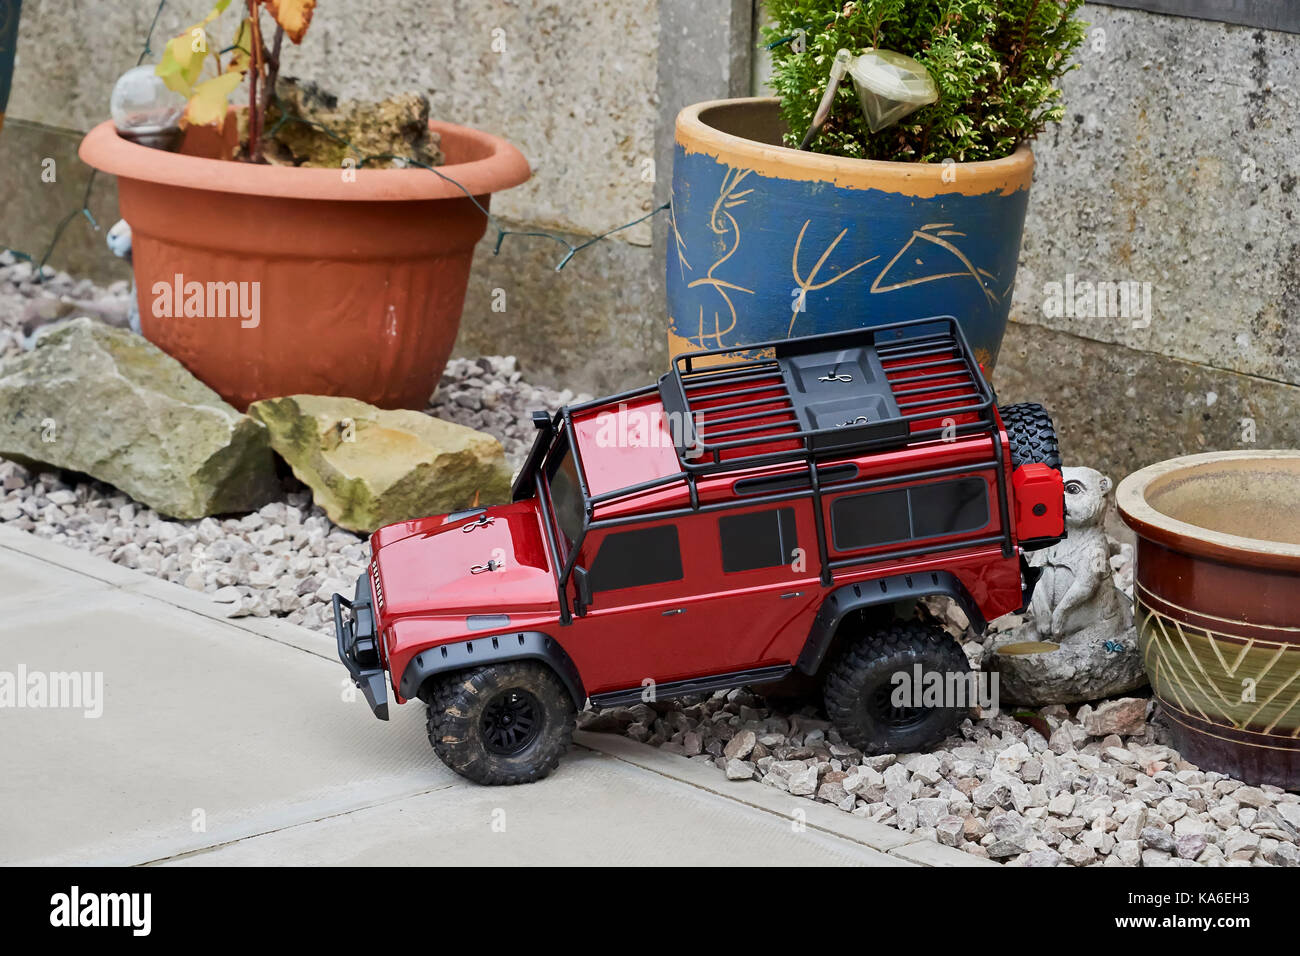 Model Radio Controlled Land Rover being operated by a teenager. Stock Photo